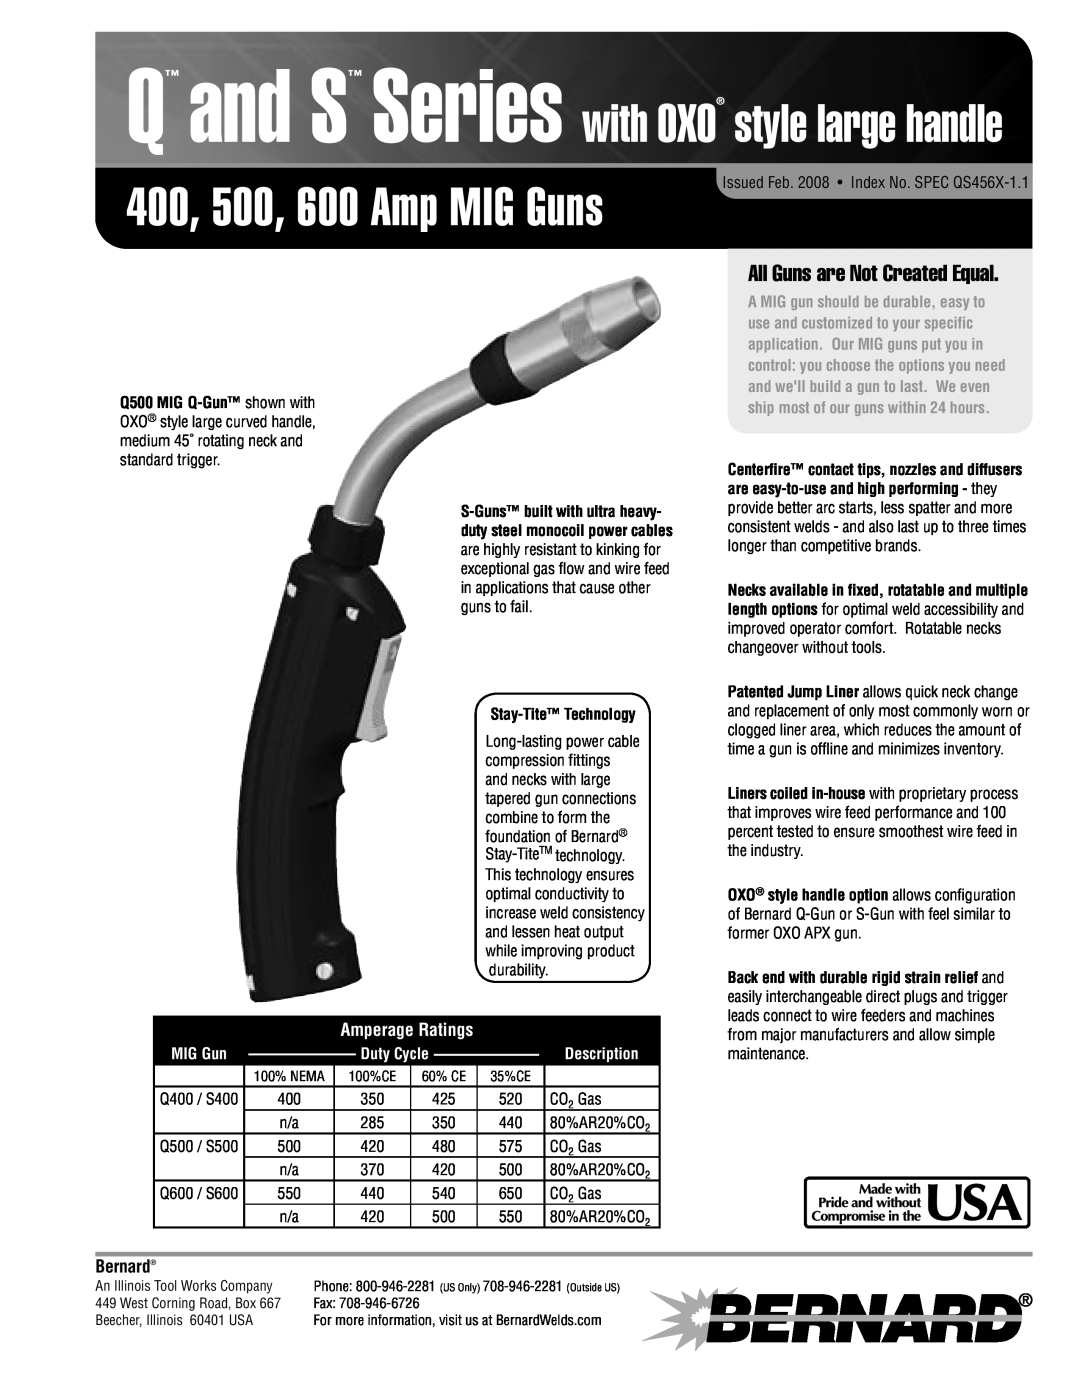 Bernard S500 manual 400, 500, 600 Amp MIG Guns, Q and S Series with OXO style large handle, All Guns are Not Created Equal 